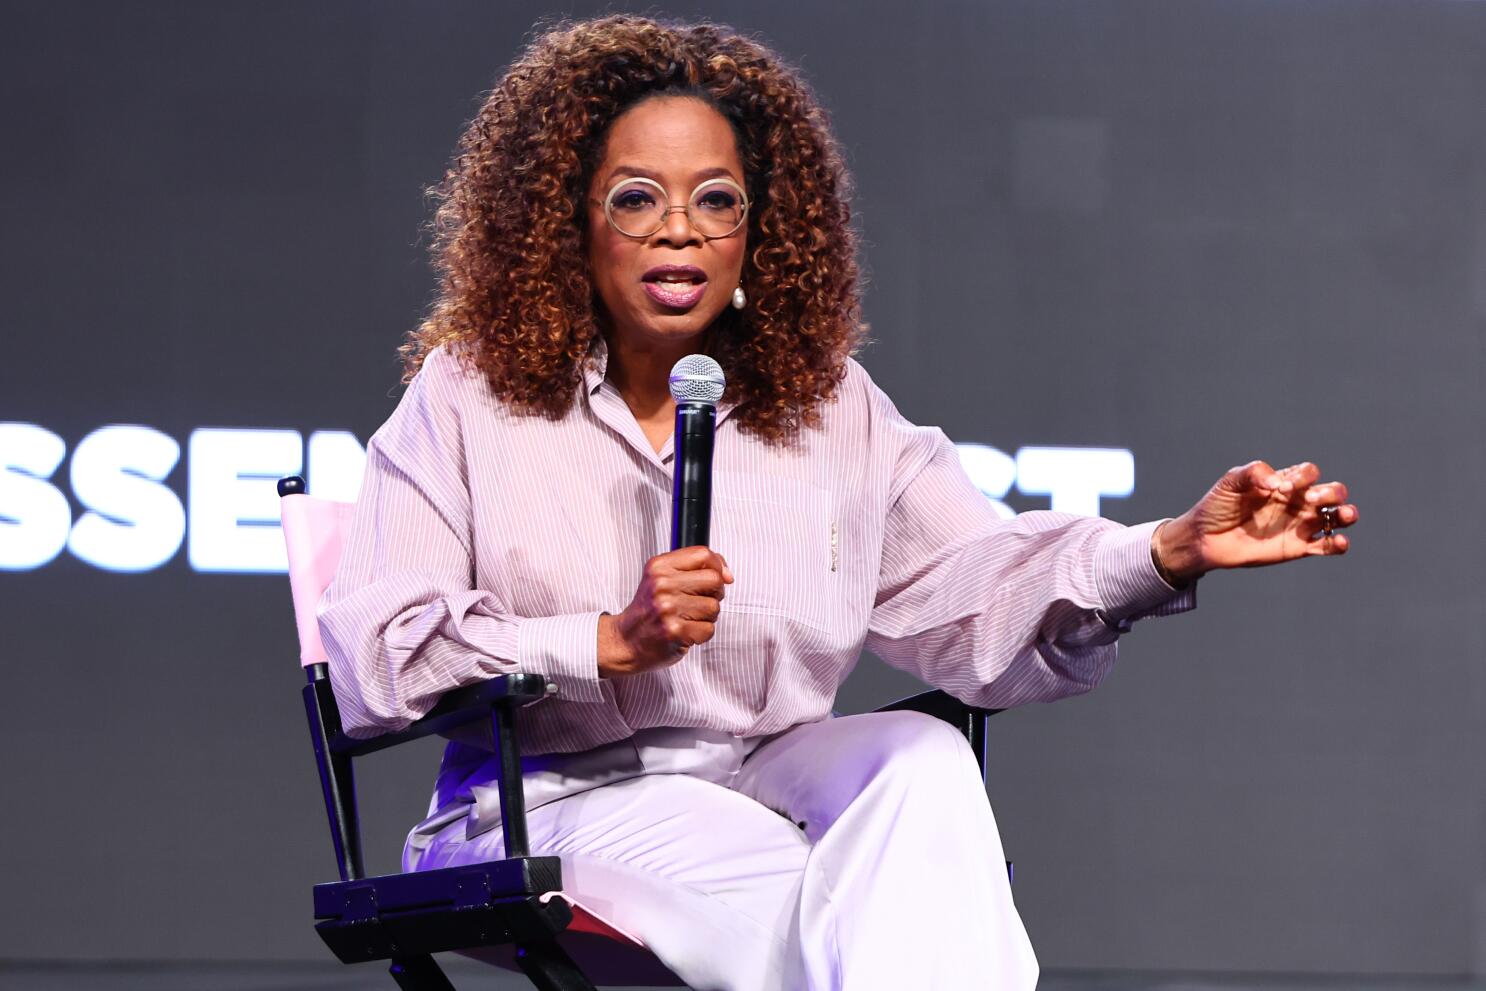  Oprah Winfrey gets candid about battling weight stigma: ‘People treat you differently’